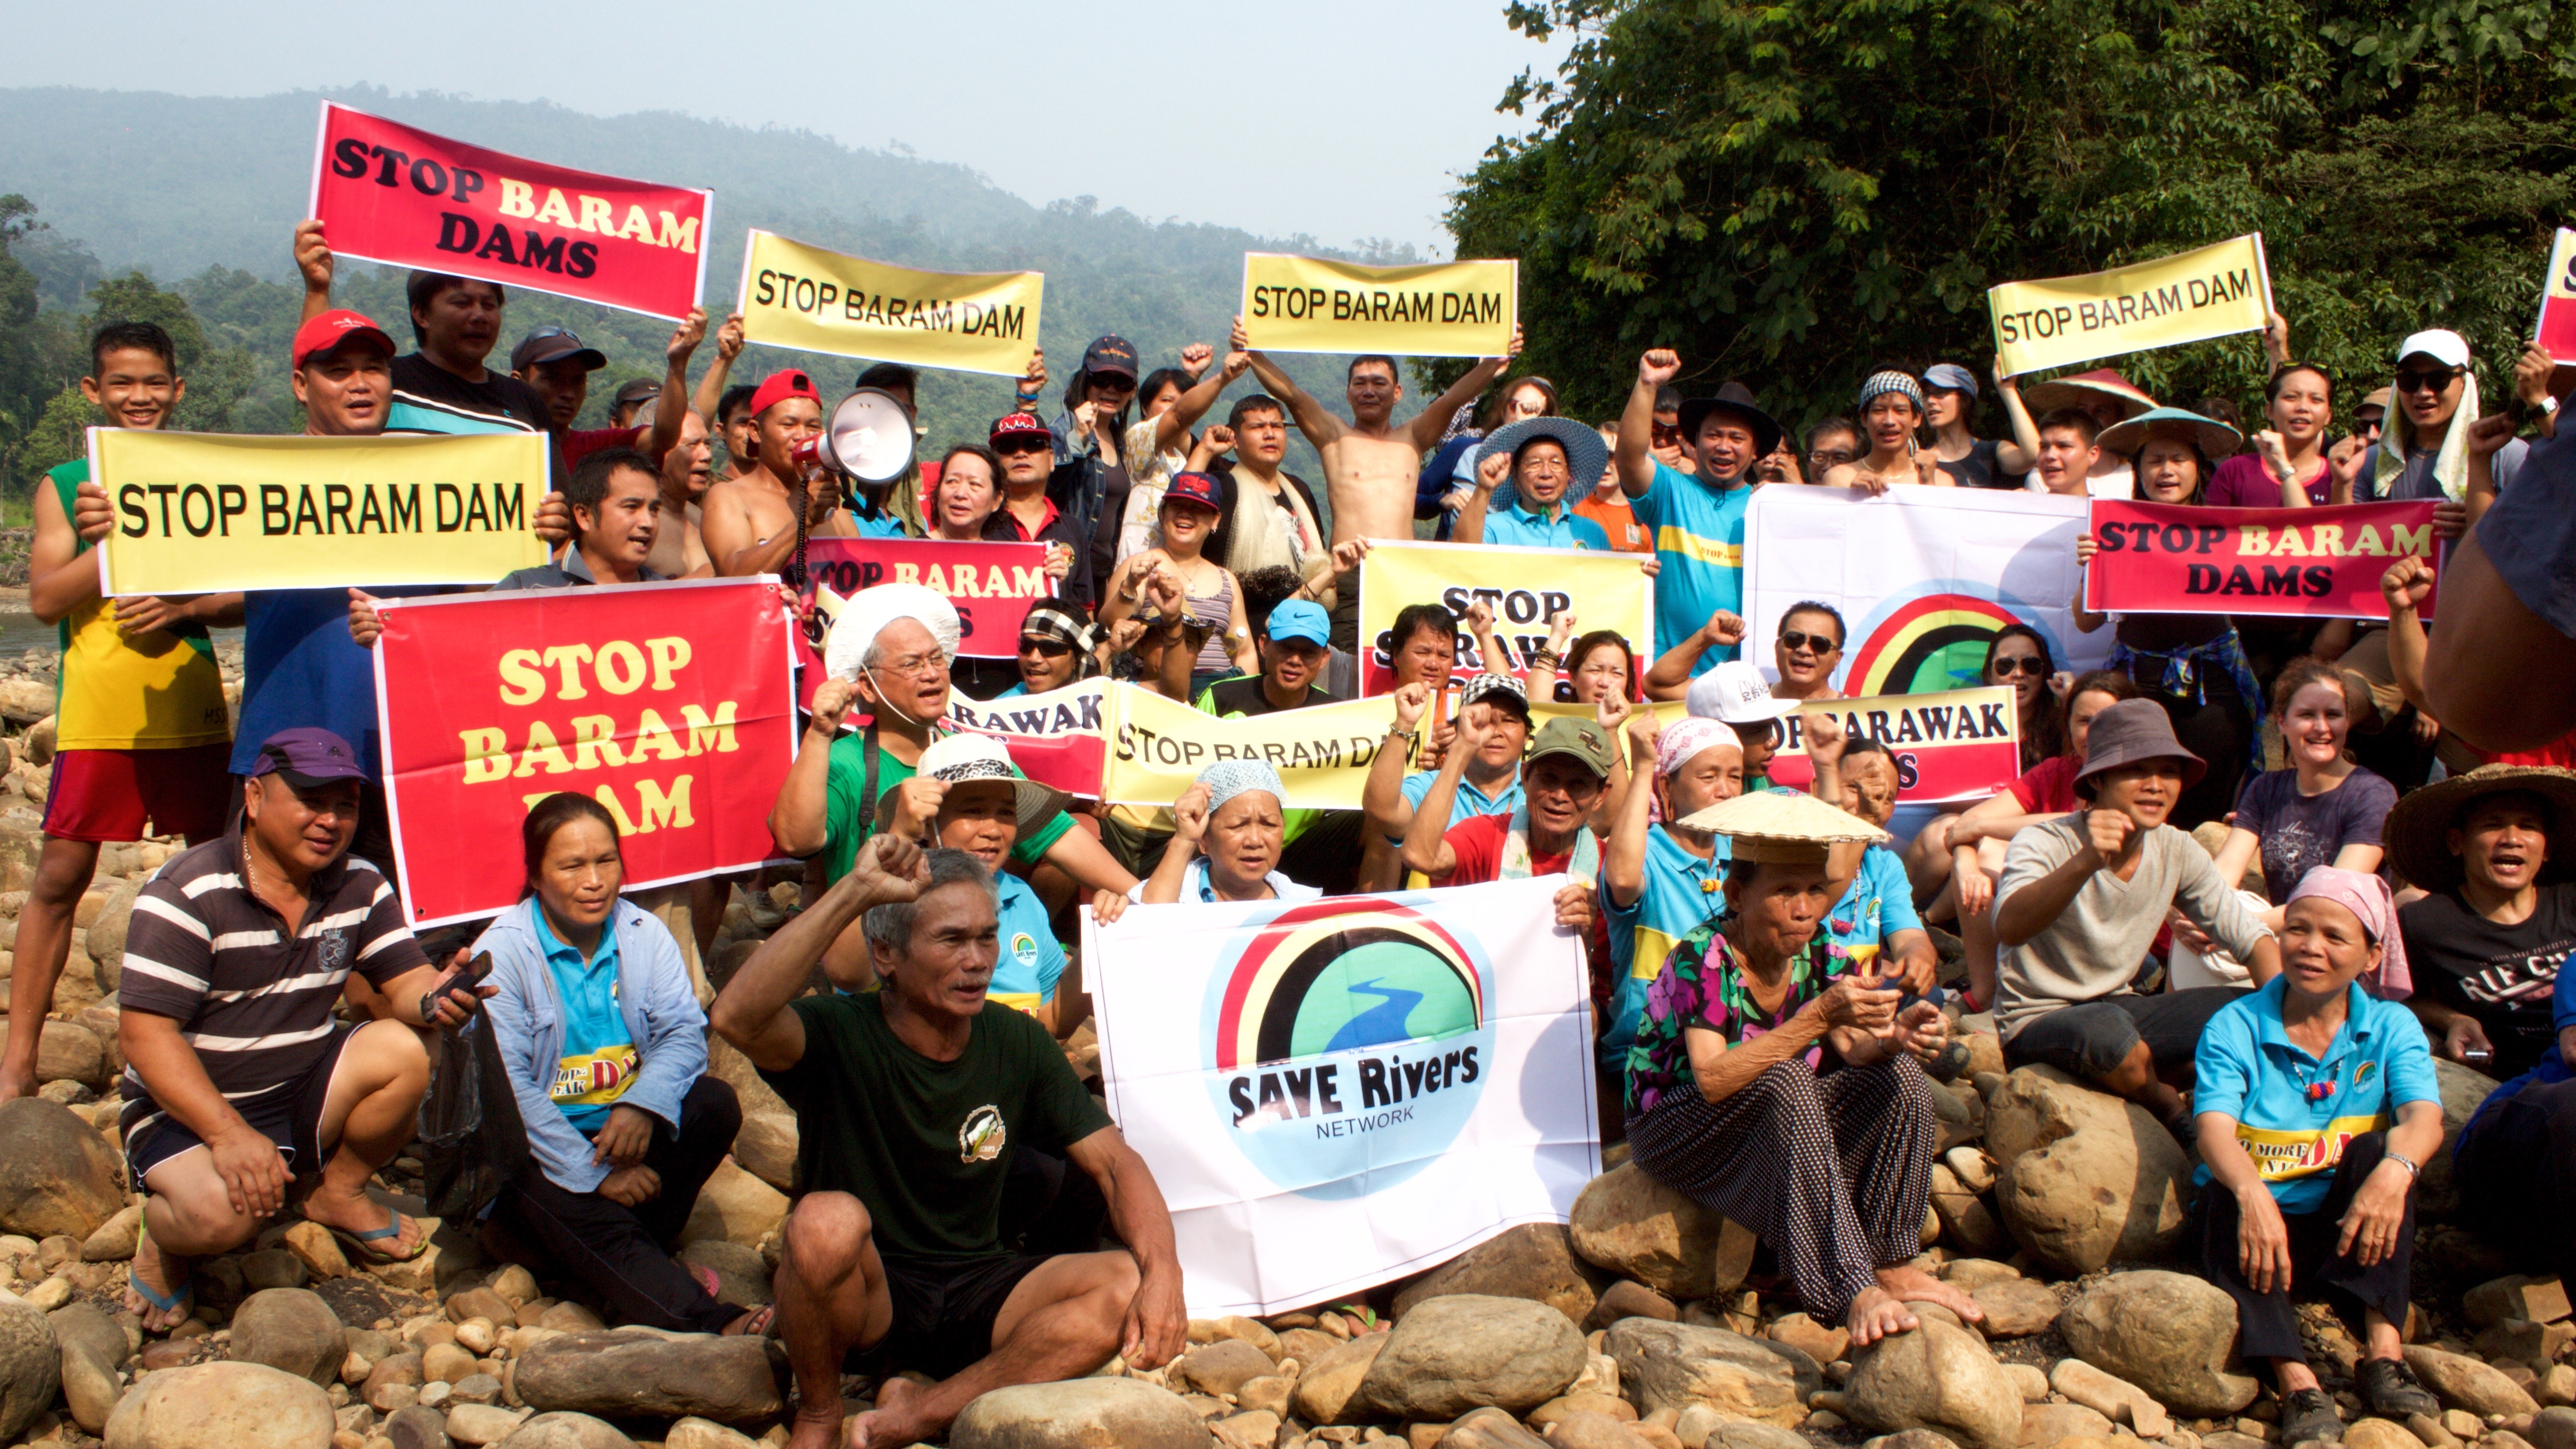 People of Baram and participants of WISER stand in solidarity at the Long Lama Blockade / Photo Credit: The Borneo Project